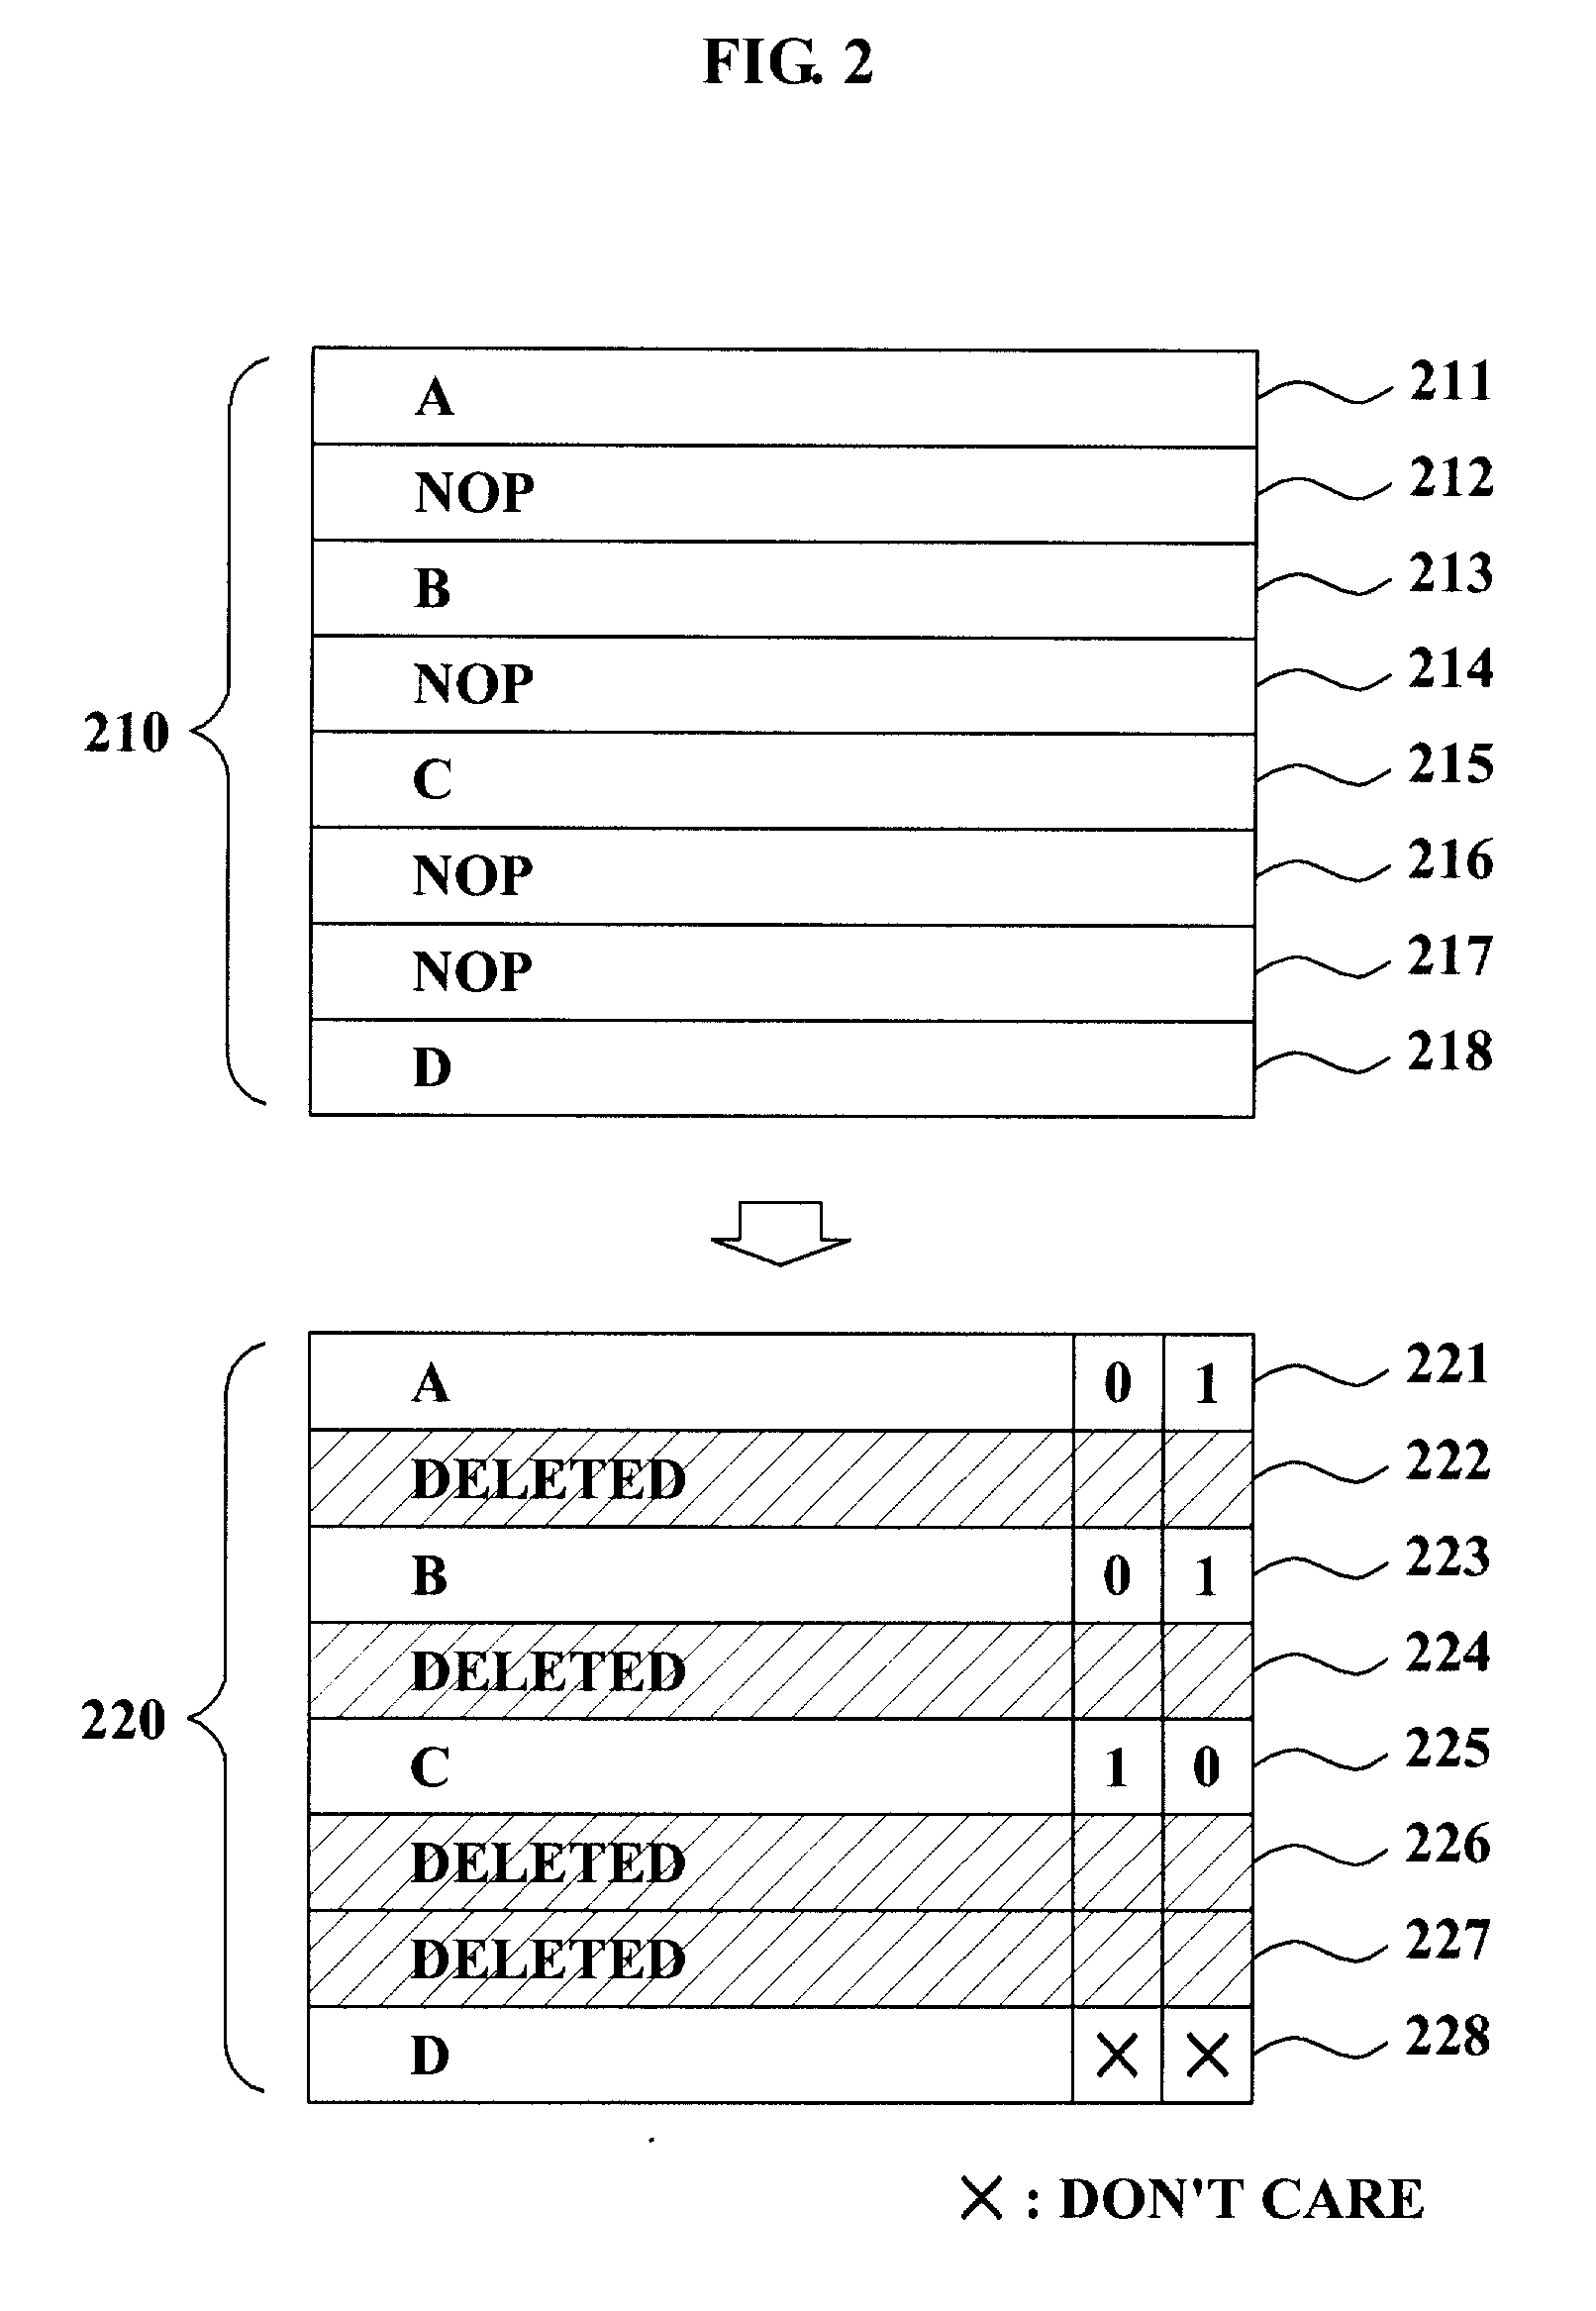 Apparatus for compressing instruction word for parallel processing vliw computer and method for the same